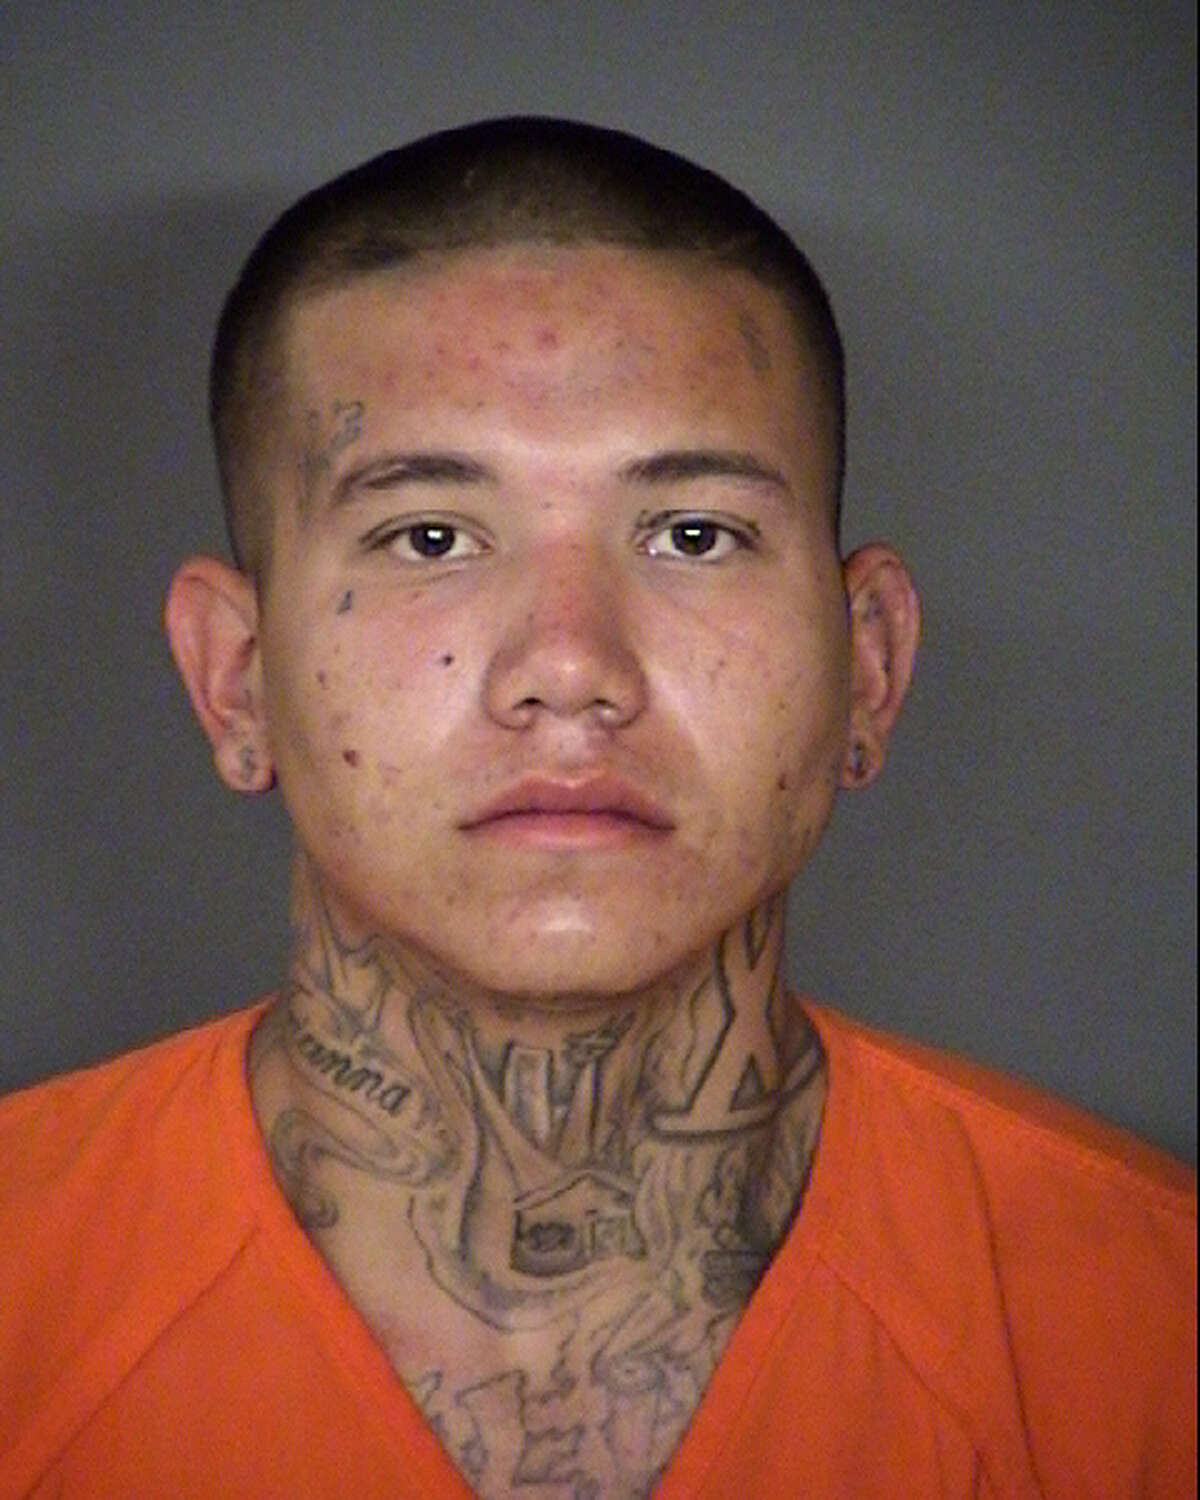 Eduardo De Anda, 21, faces one count of aggravated robbery. He remains in the Bexar County Jail on a $75,000 bond.